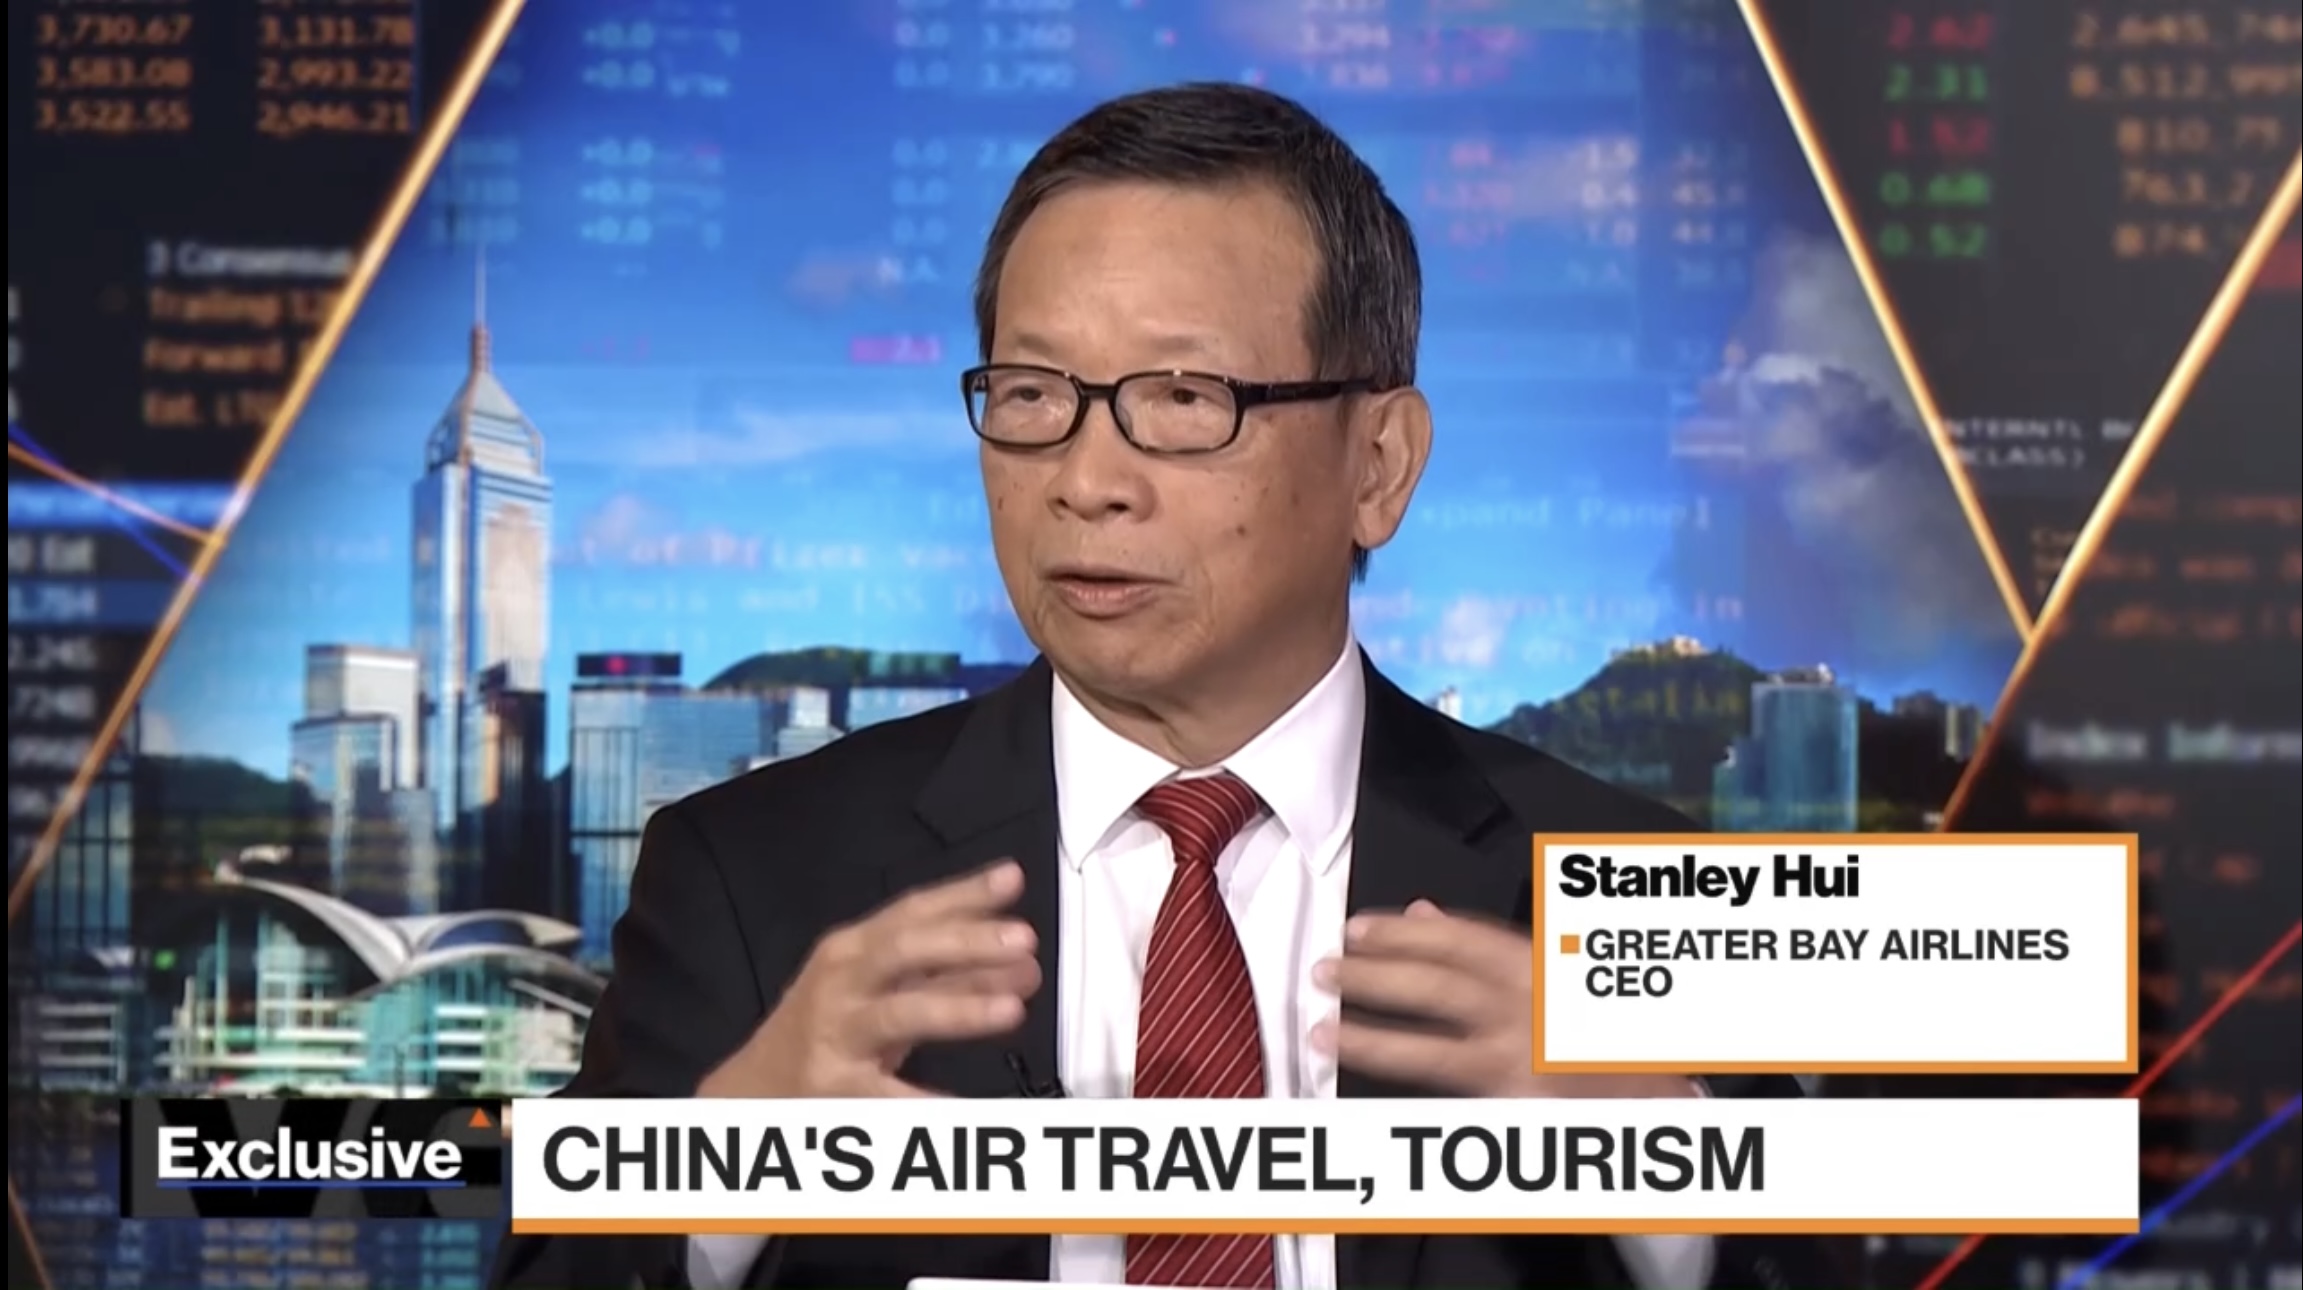 CEO Stanley Hui shares his outlook for the air travel industry in APAC